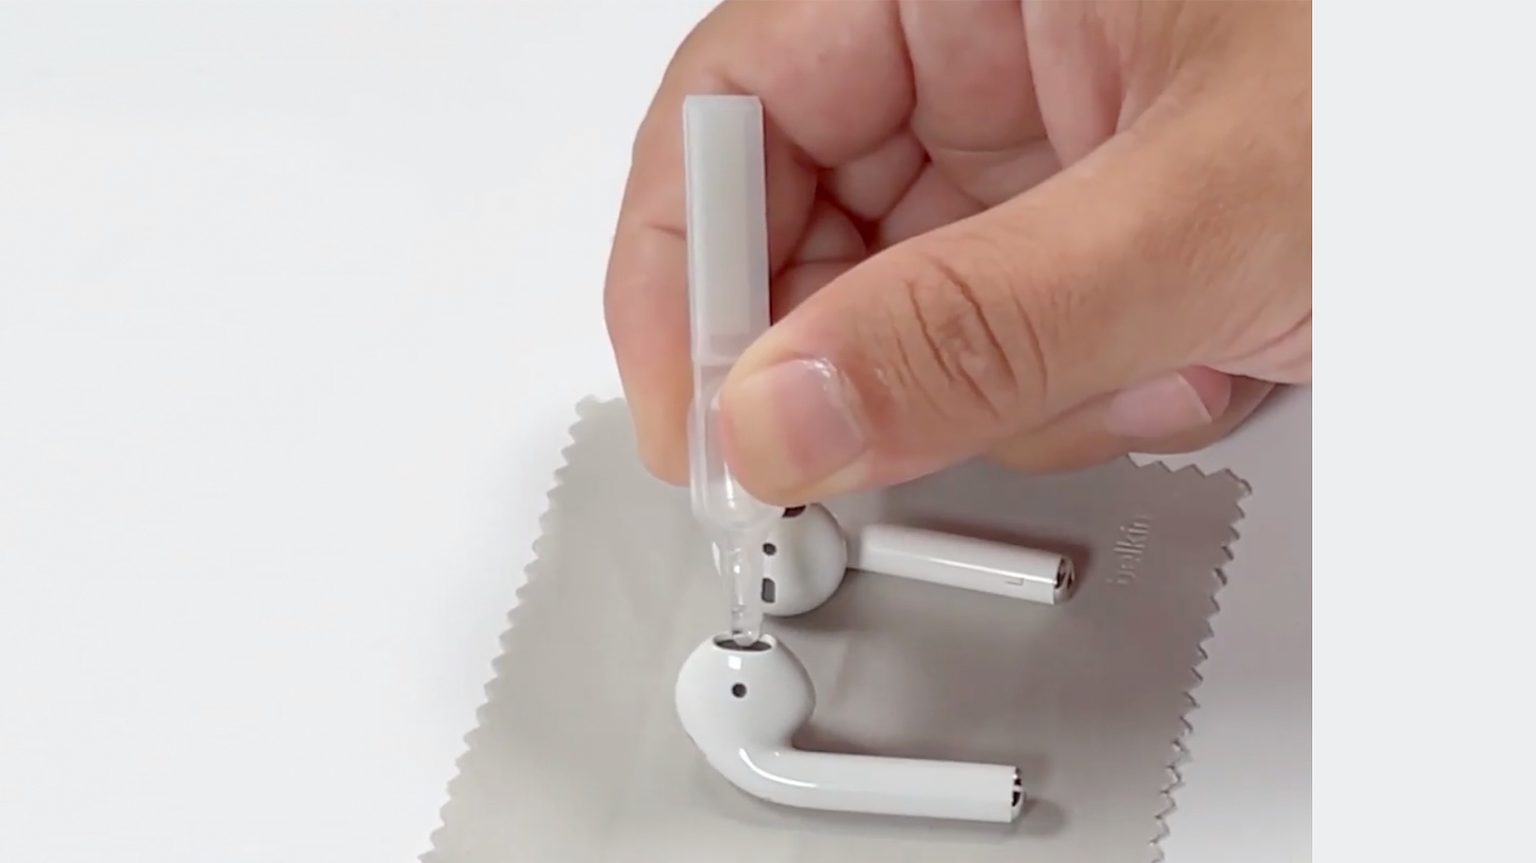 Make AirPods sound like new with Belkin cleaning kit